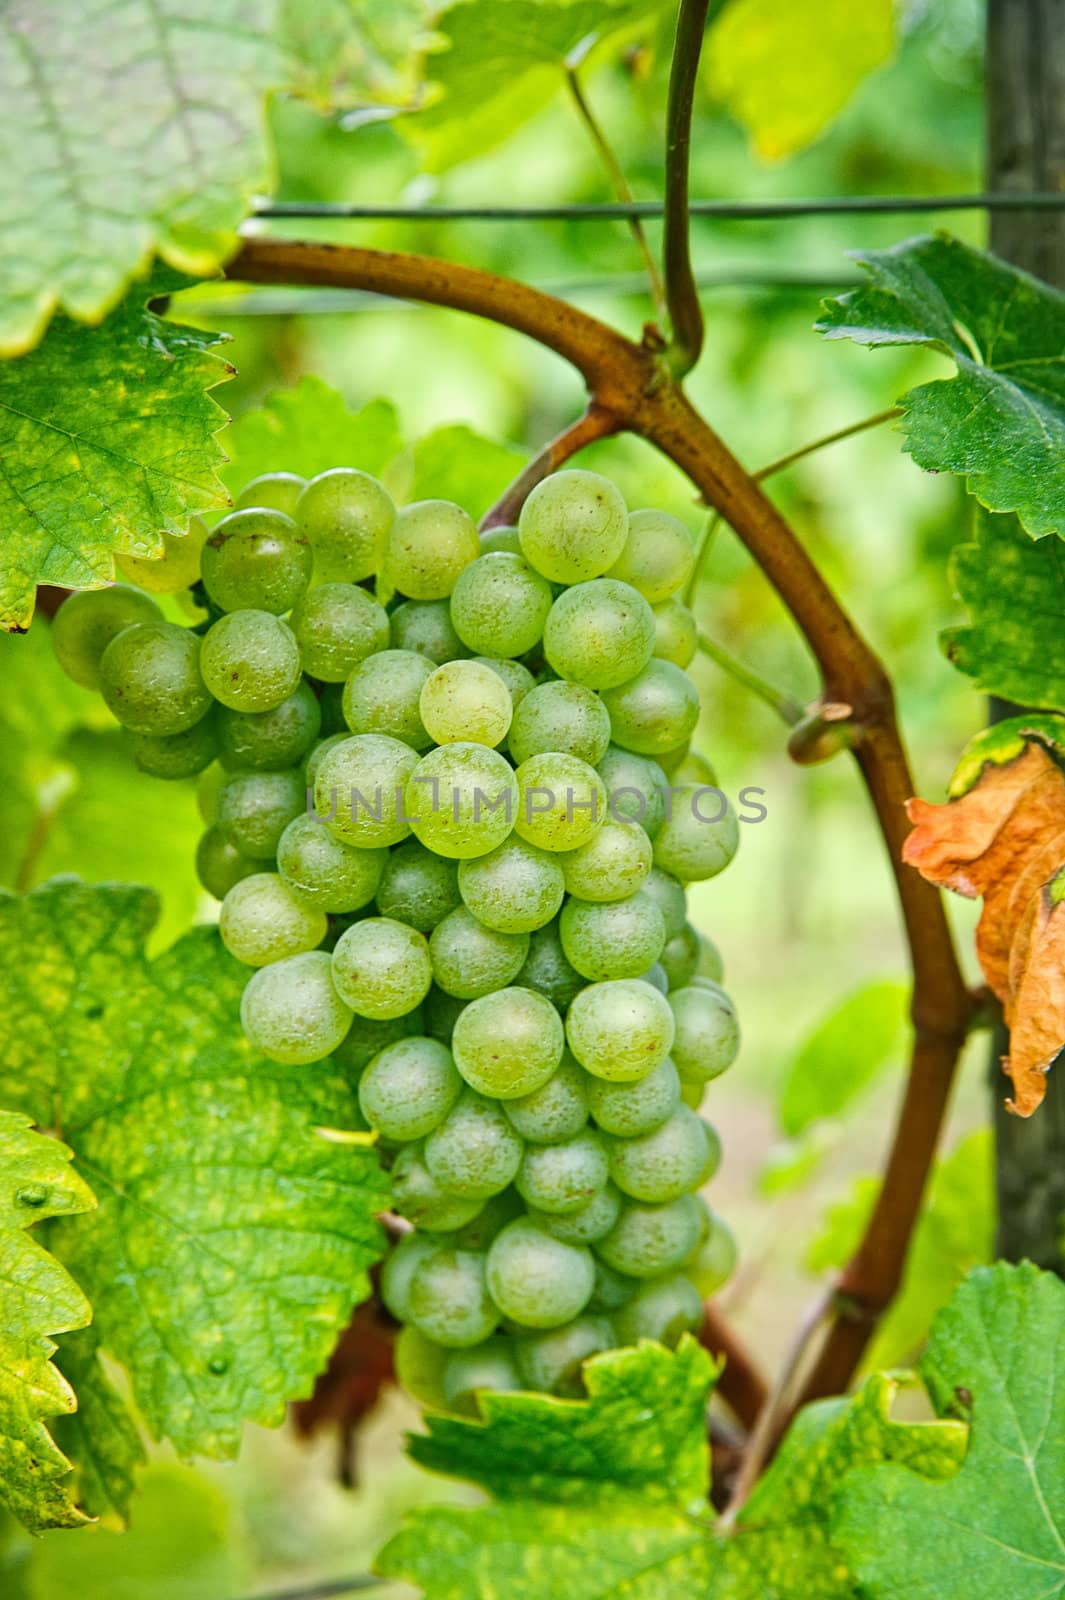 White Grapes on a Branch